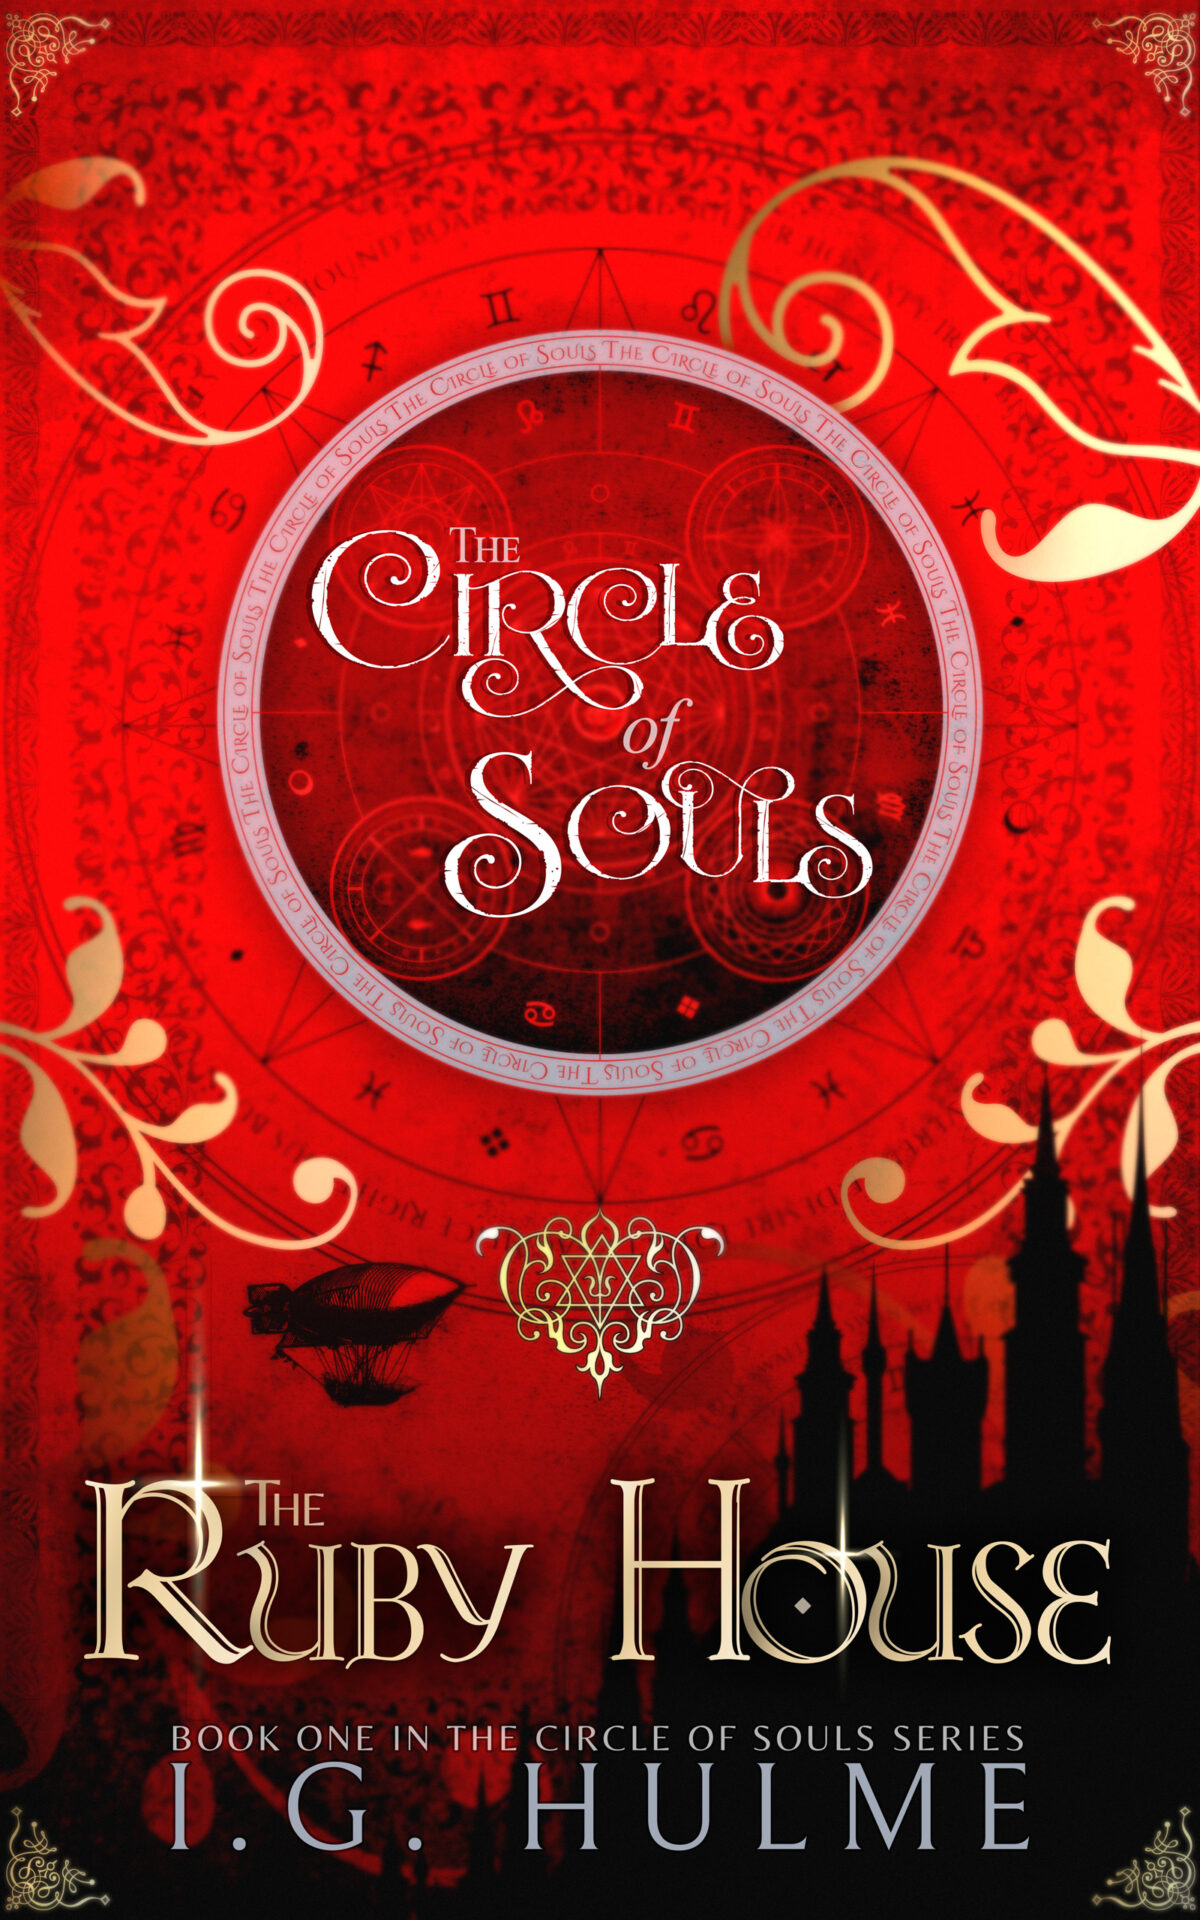 THE CIRCLE OF SOULS - The Ruby House by I.G. Hulme